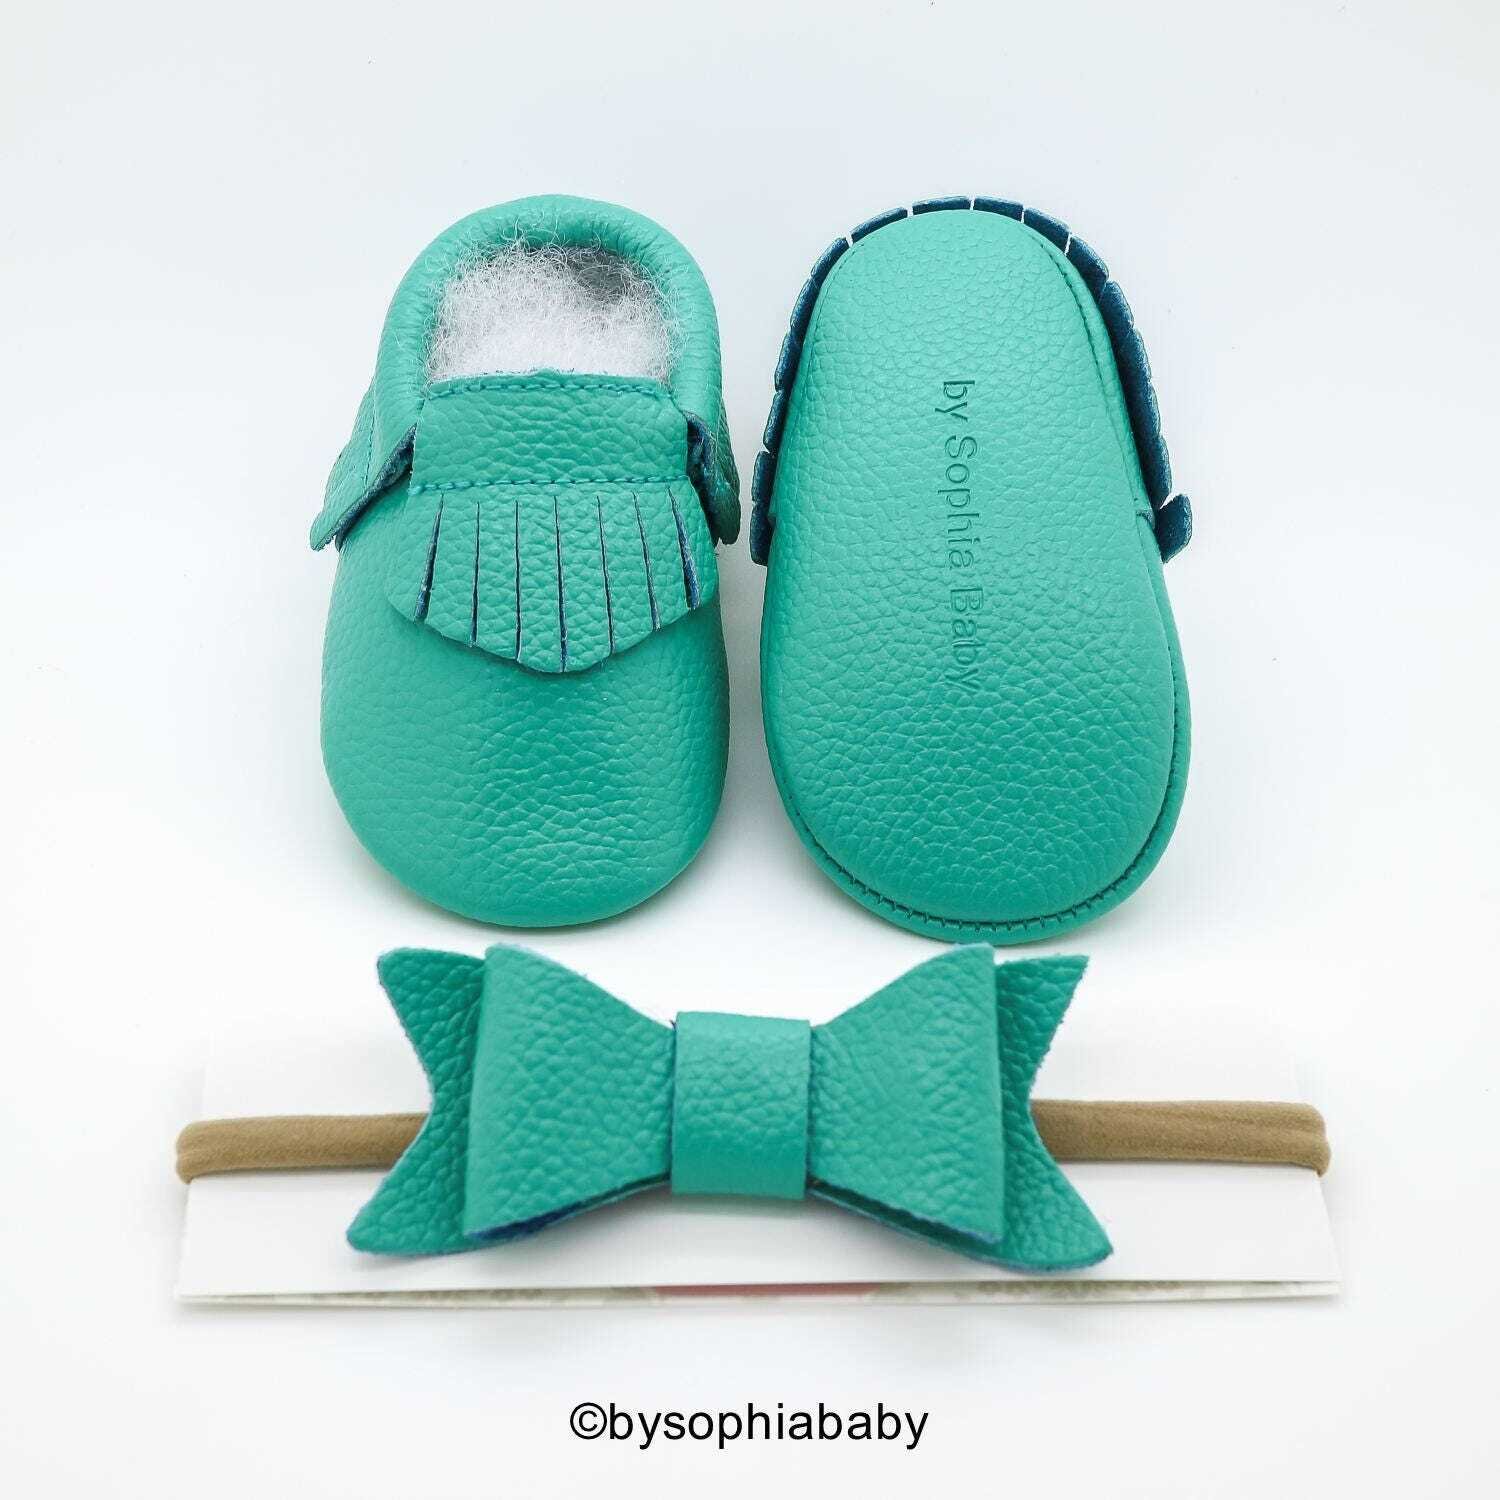 Teal Fringe Moccasins Baby Teal Moccasins Baby Leather Shoes Genuine Leather Moccs Toddler Moccasins Baby Moccs Baby Shower Gift